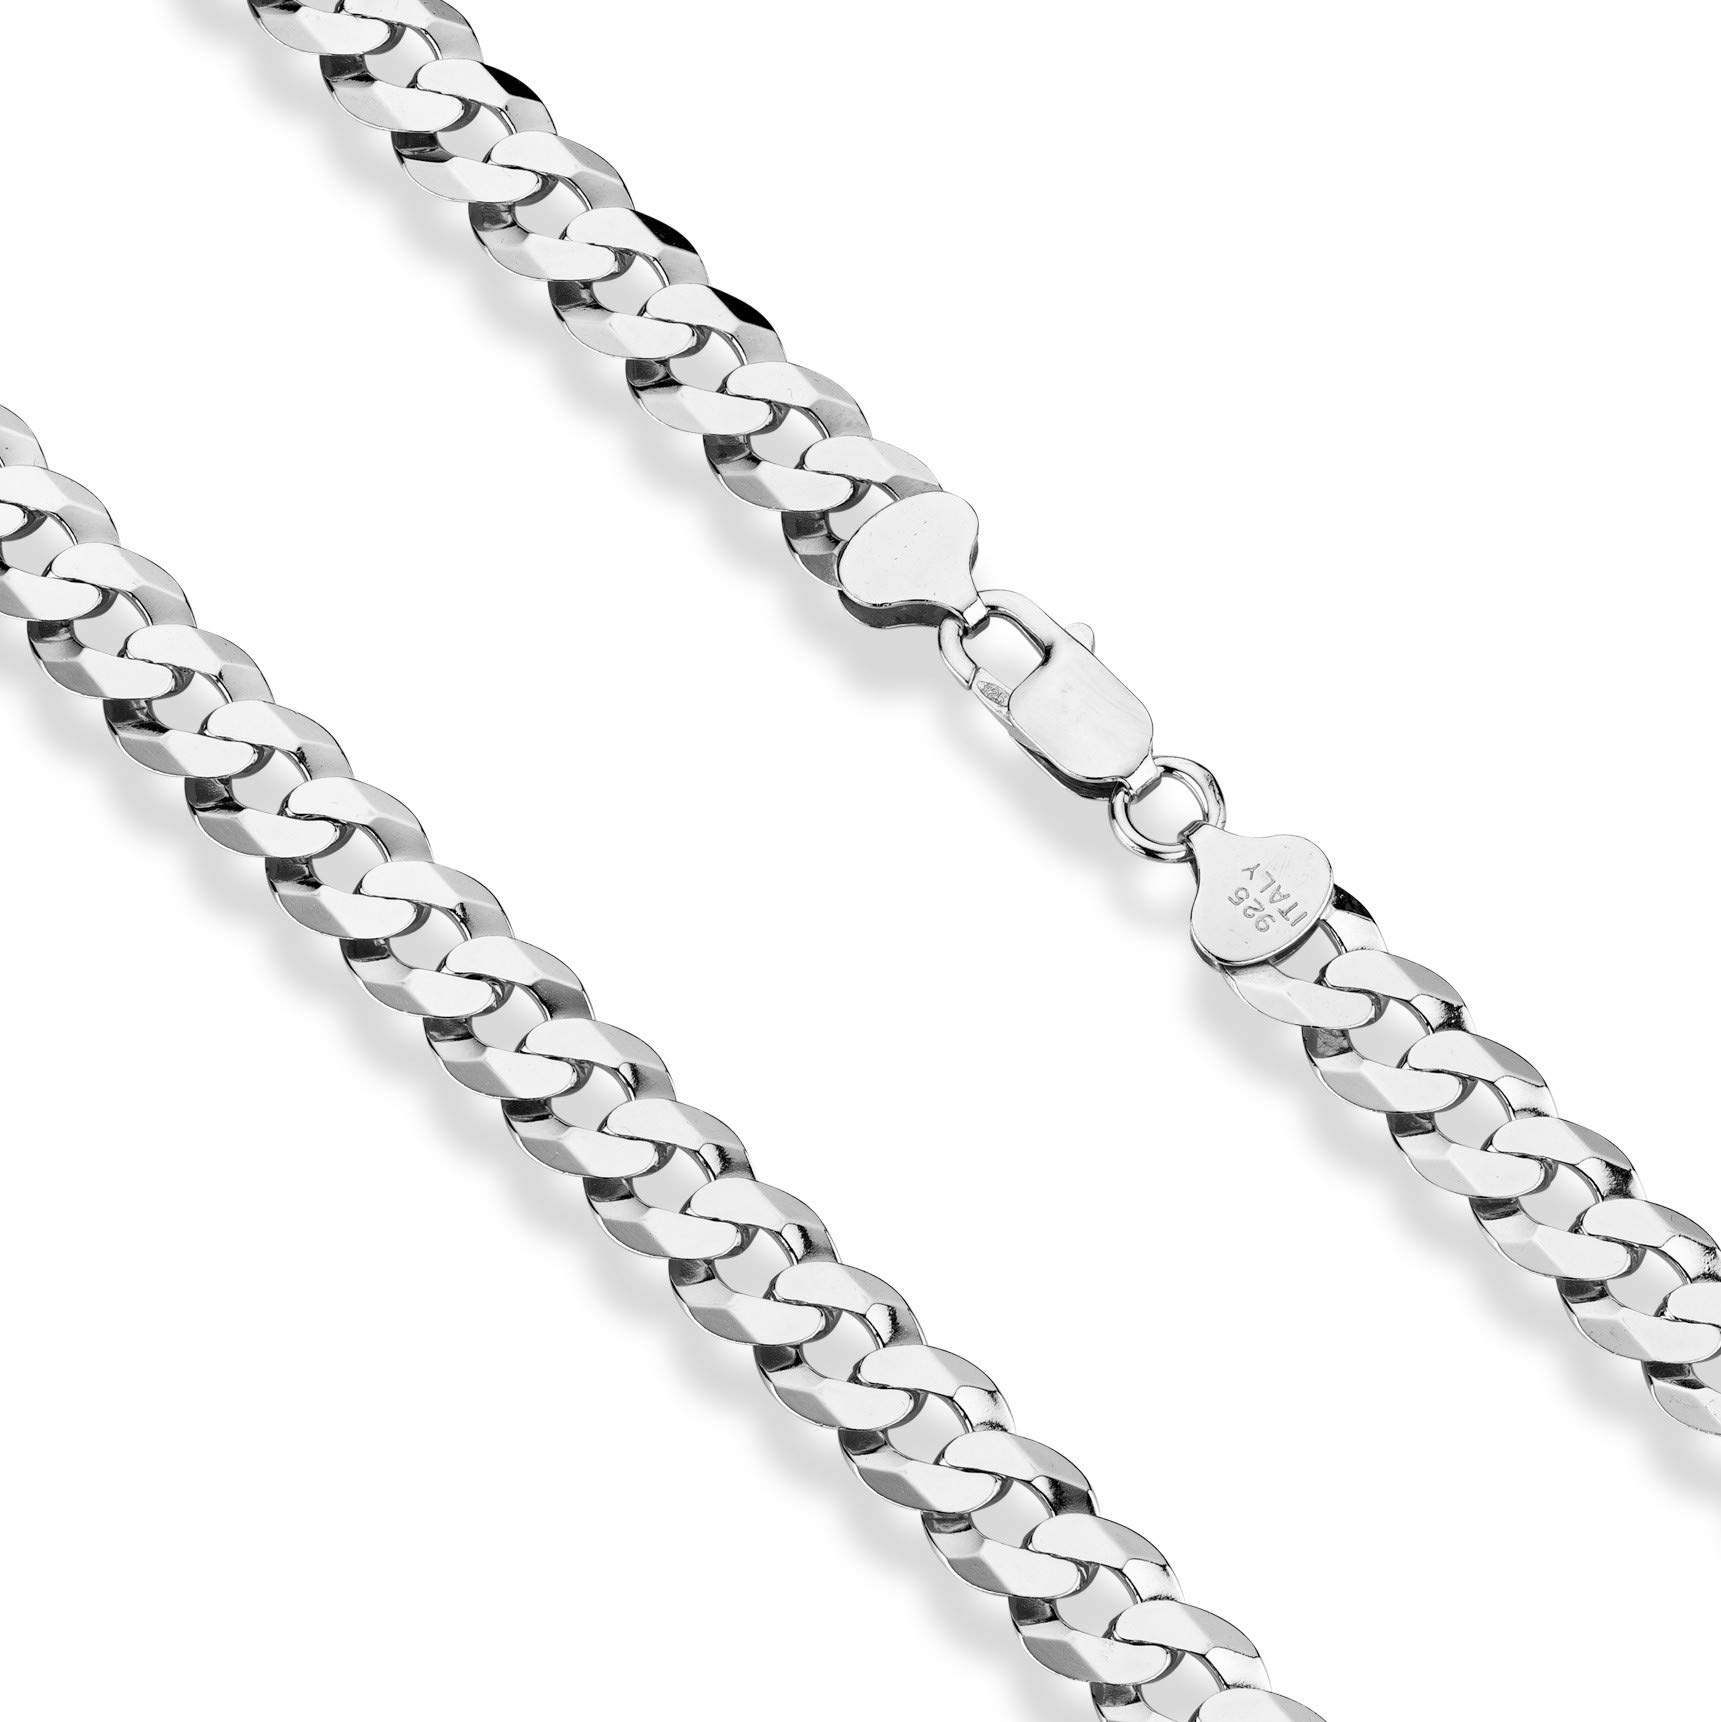 Miabella Solid 925 Sterling Silver Italian 9mm Solid Diamond-Cut Cuban Link Curb Chain Necklace For Men, Made in Italy